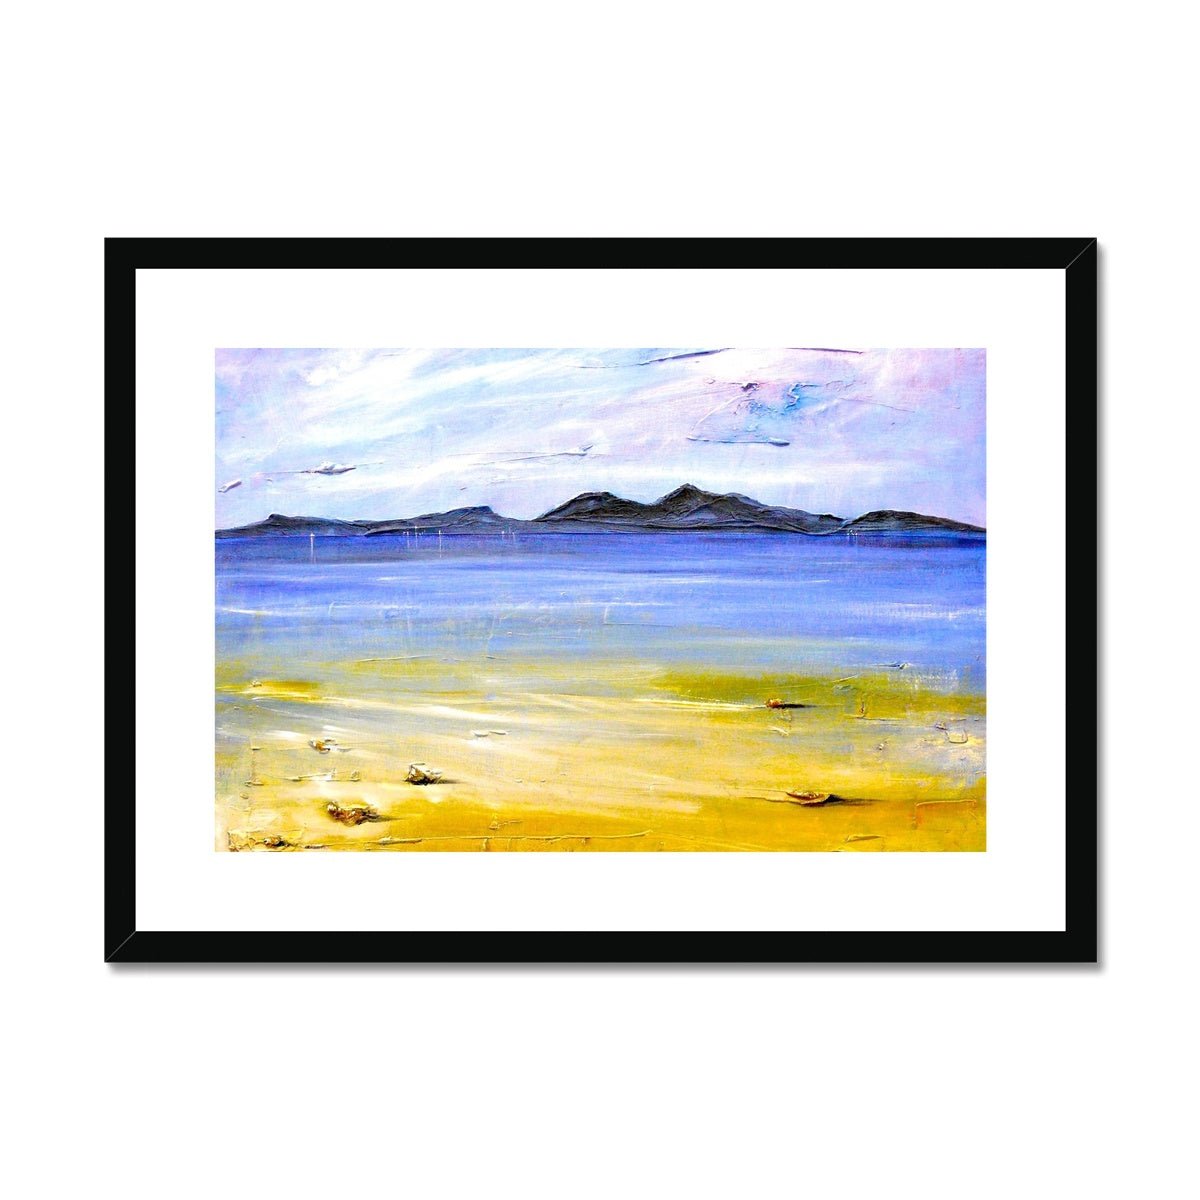 Camusdarach Beach Arisaig Painting | Framed & Mounted Prints From Scotland-Framed & Mounted Prints-Scottish Highlands & Lowlands Art Gallery-A2 Landscape-Black Frame-Paintings, Prints, Homeware, Art Gifts From Scotland By Scottish Artist Kevin Hunter